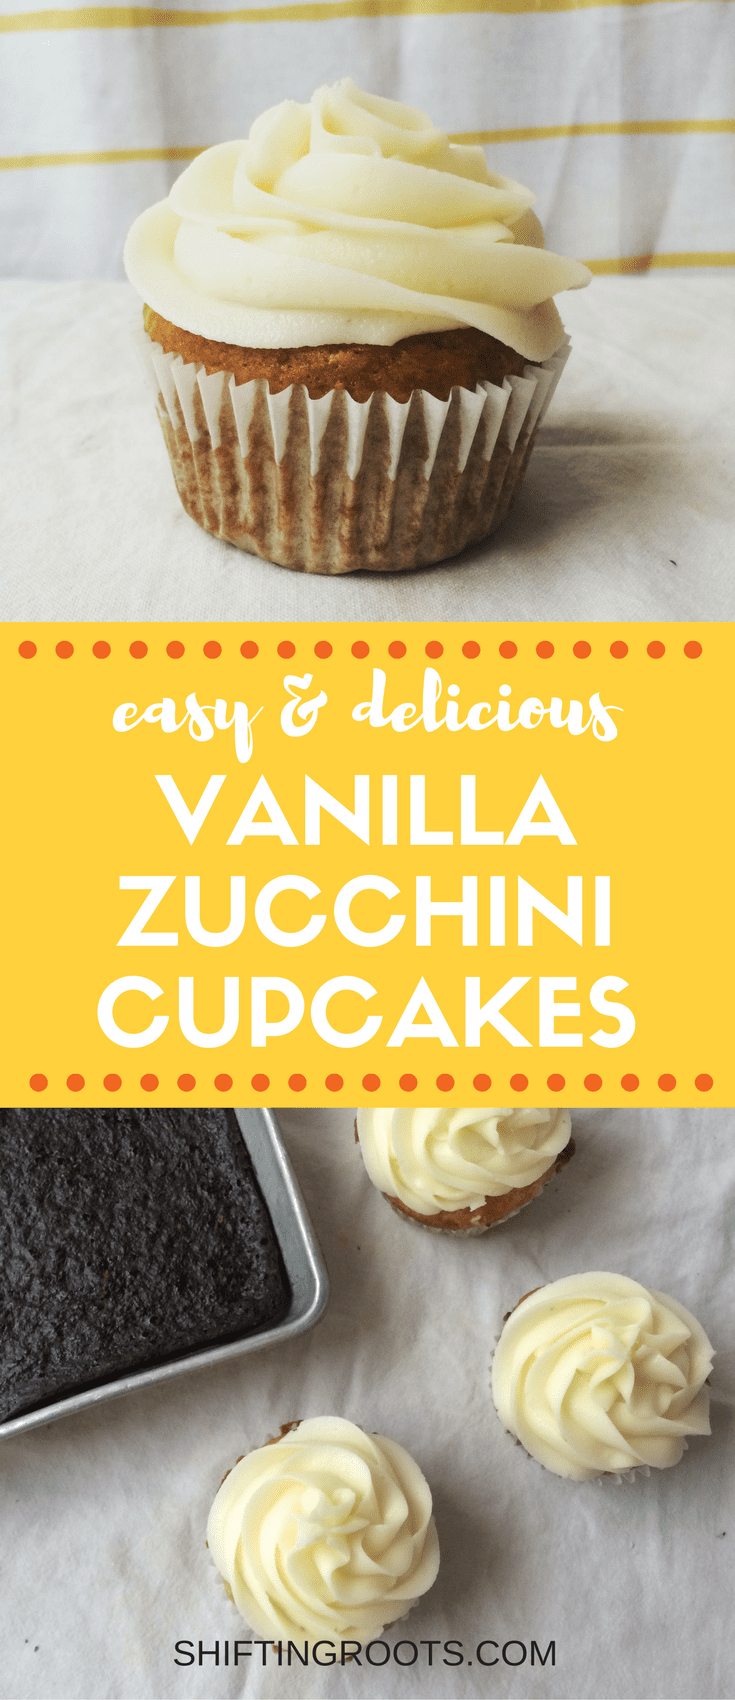 I was tired of the usual chocolate zucchini cupcake recipe, so I whipped up this easy white version instead. It's healthier than a regular cupcake, which makes up for the buttercream frosting, amirite?